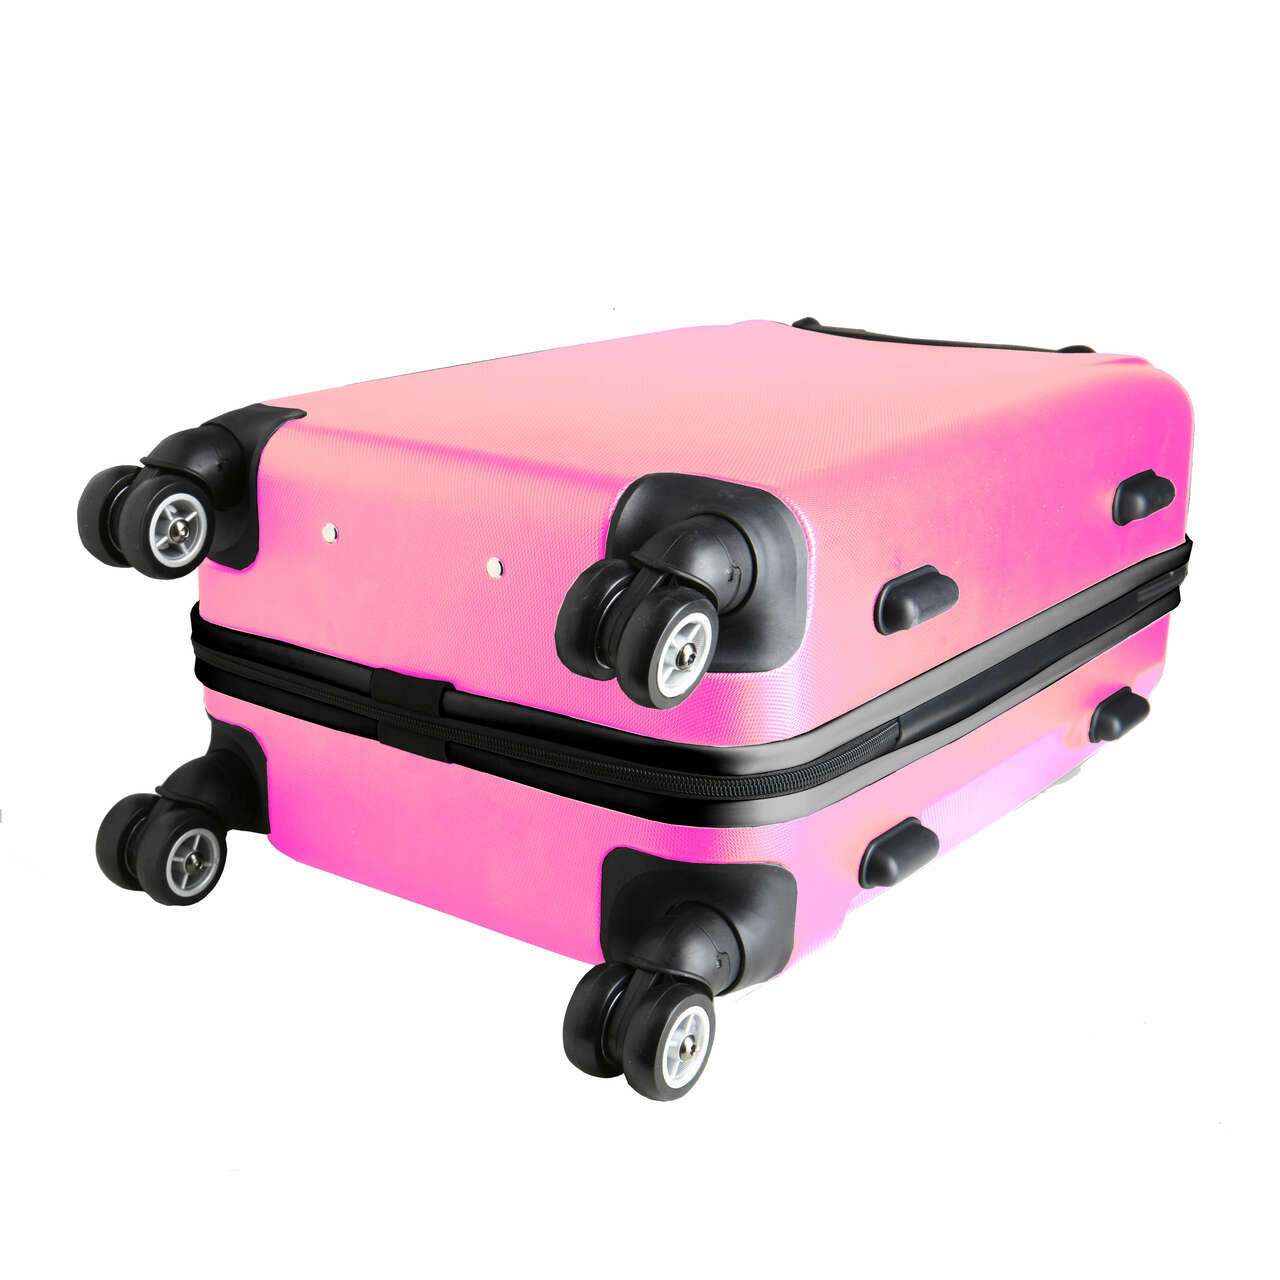 Georgia Bulldogs 20" Pink Domestic Carry-on Spinner